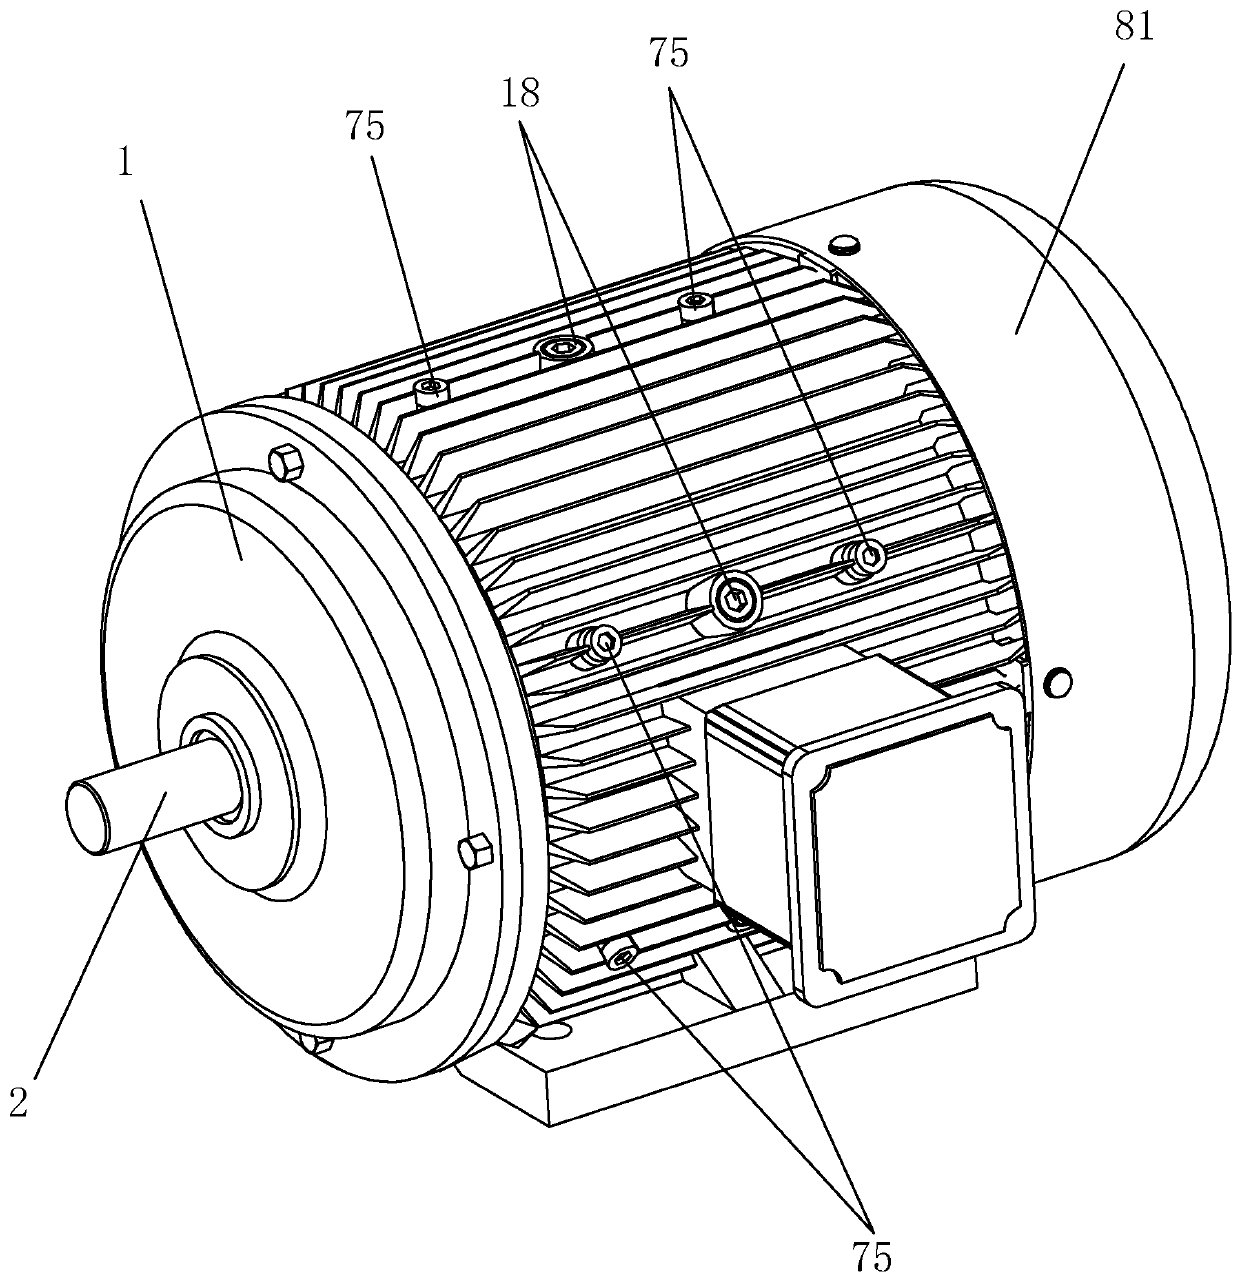 A switched reluctance motor